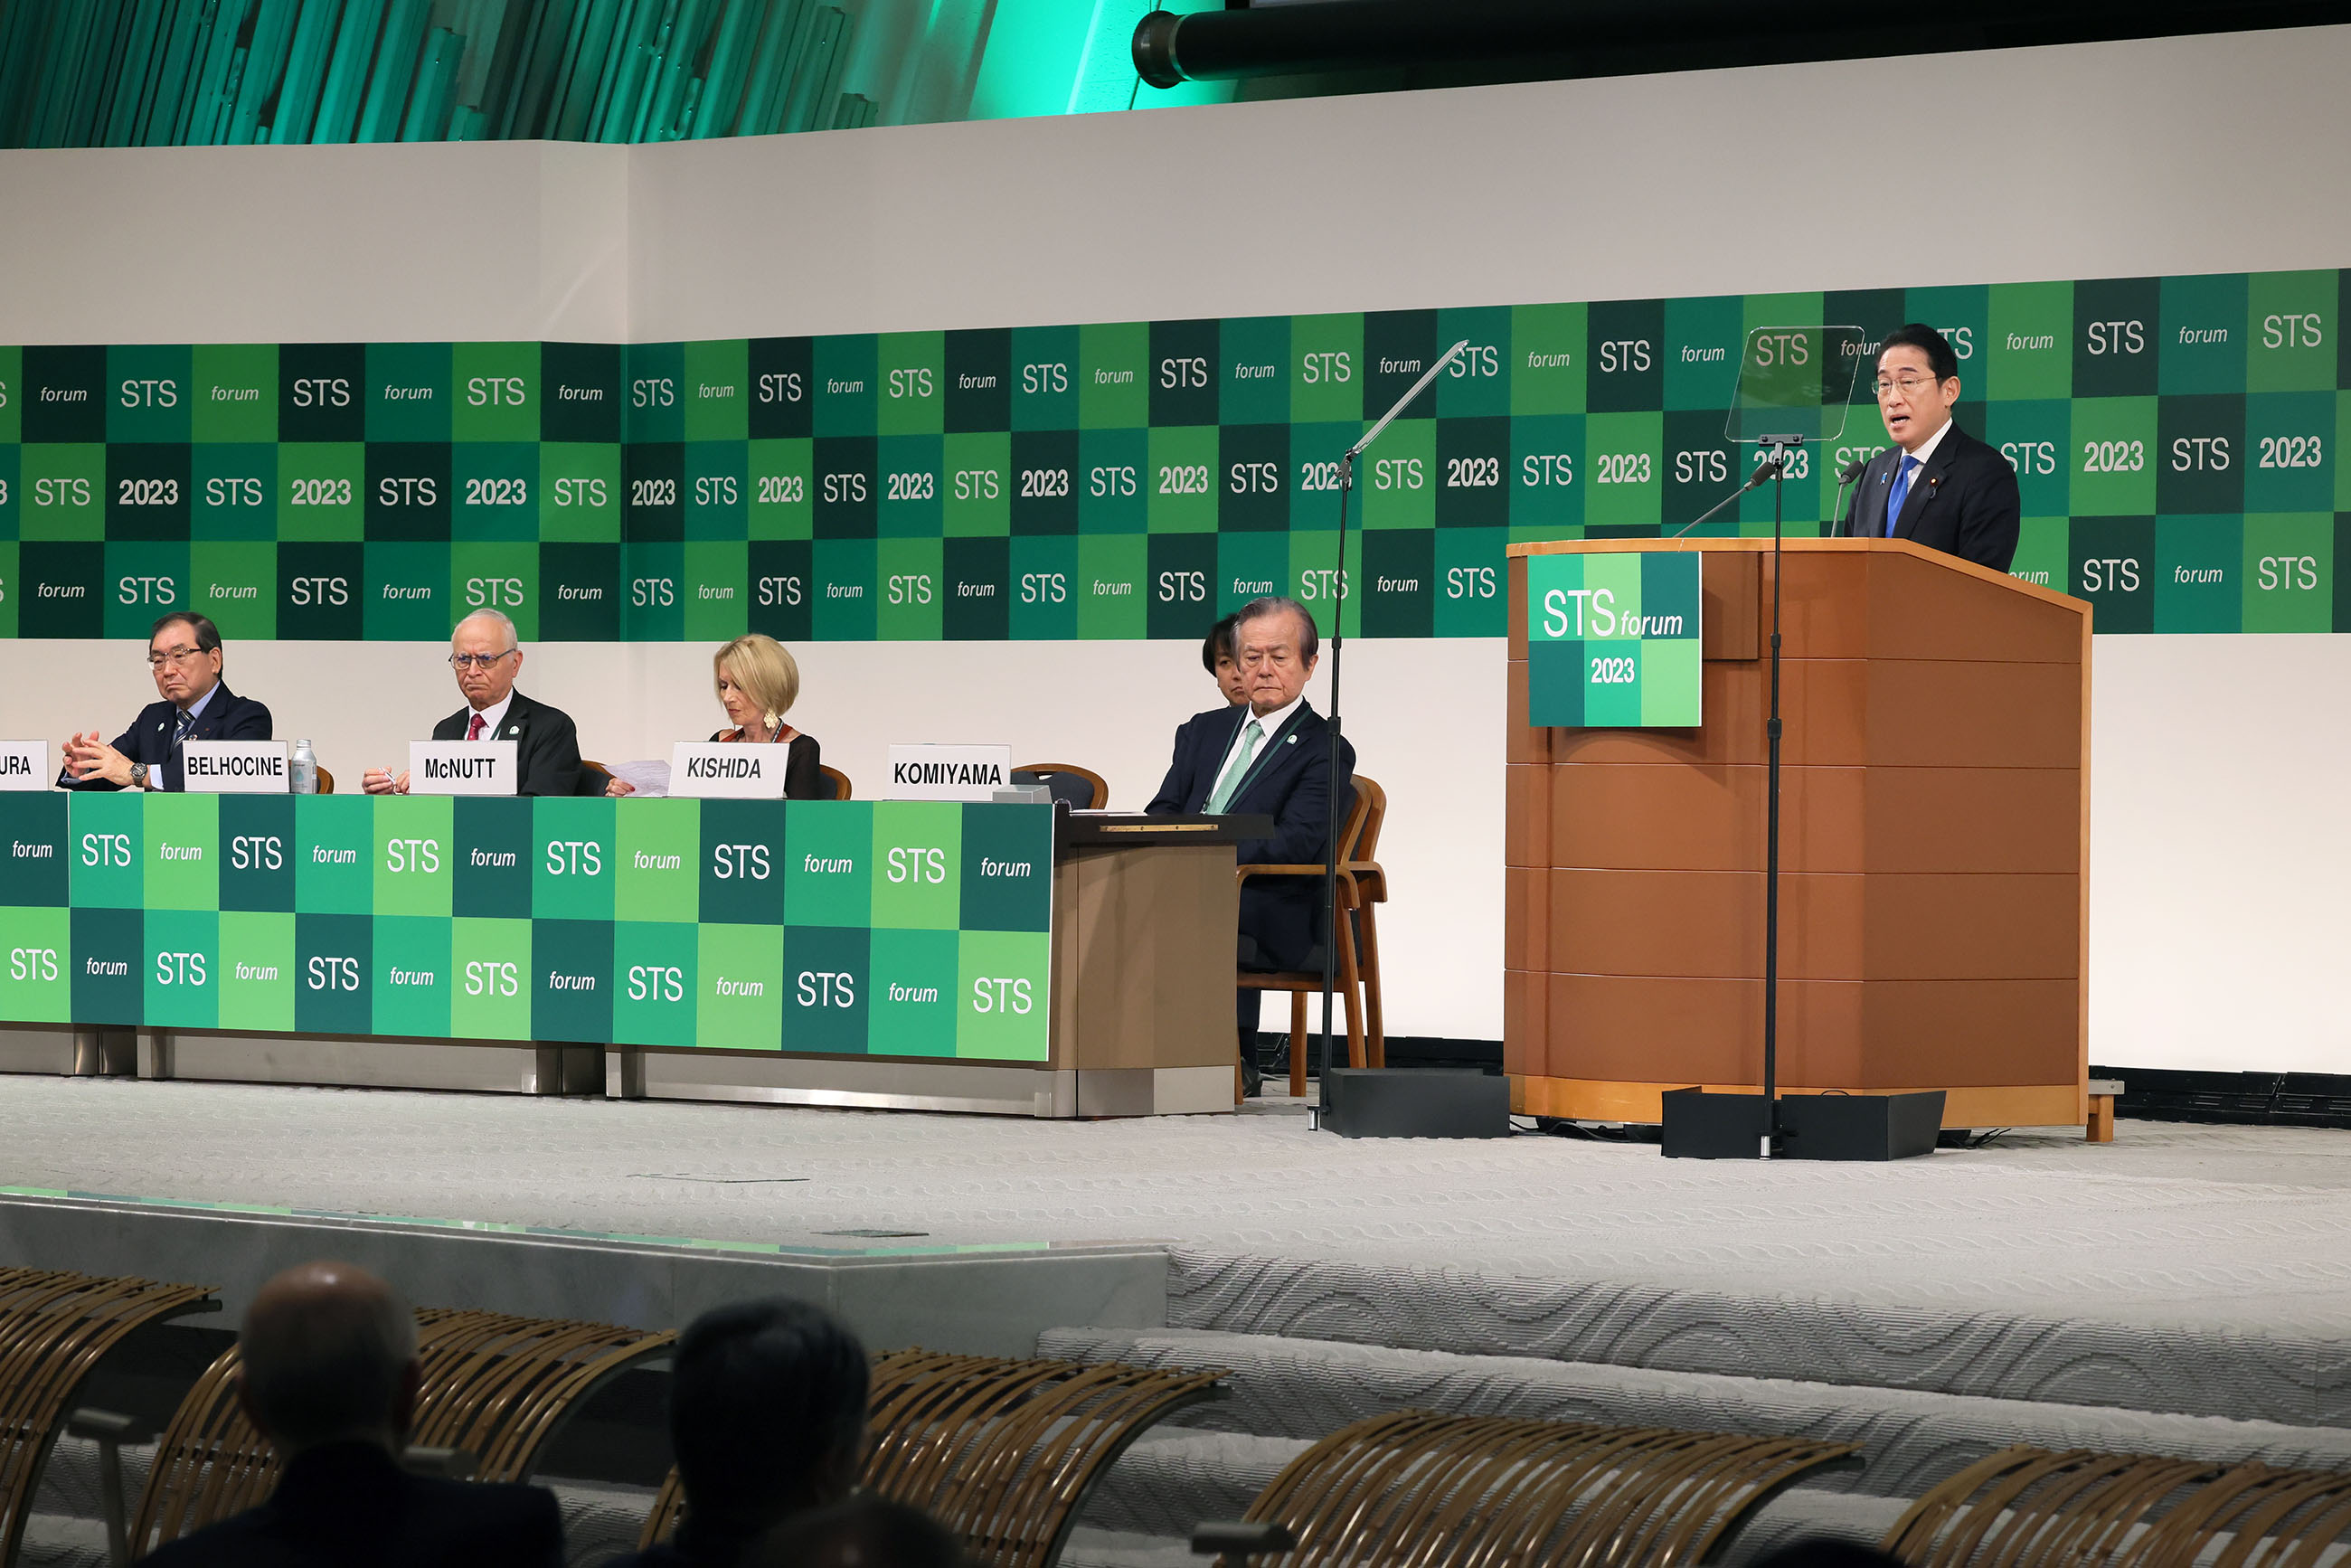 Prime Minister Kishida delivering an address at the opening ceremony (2)